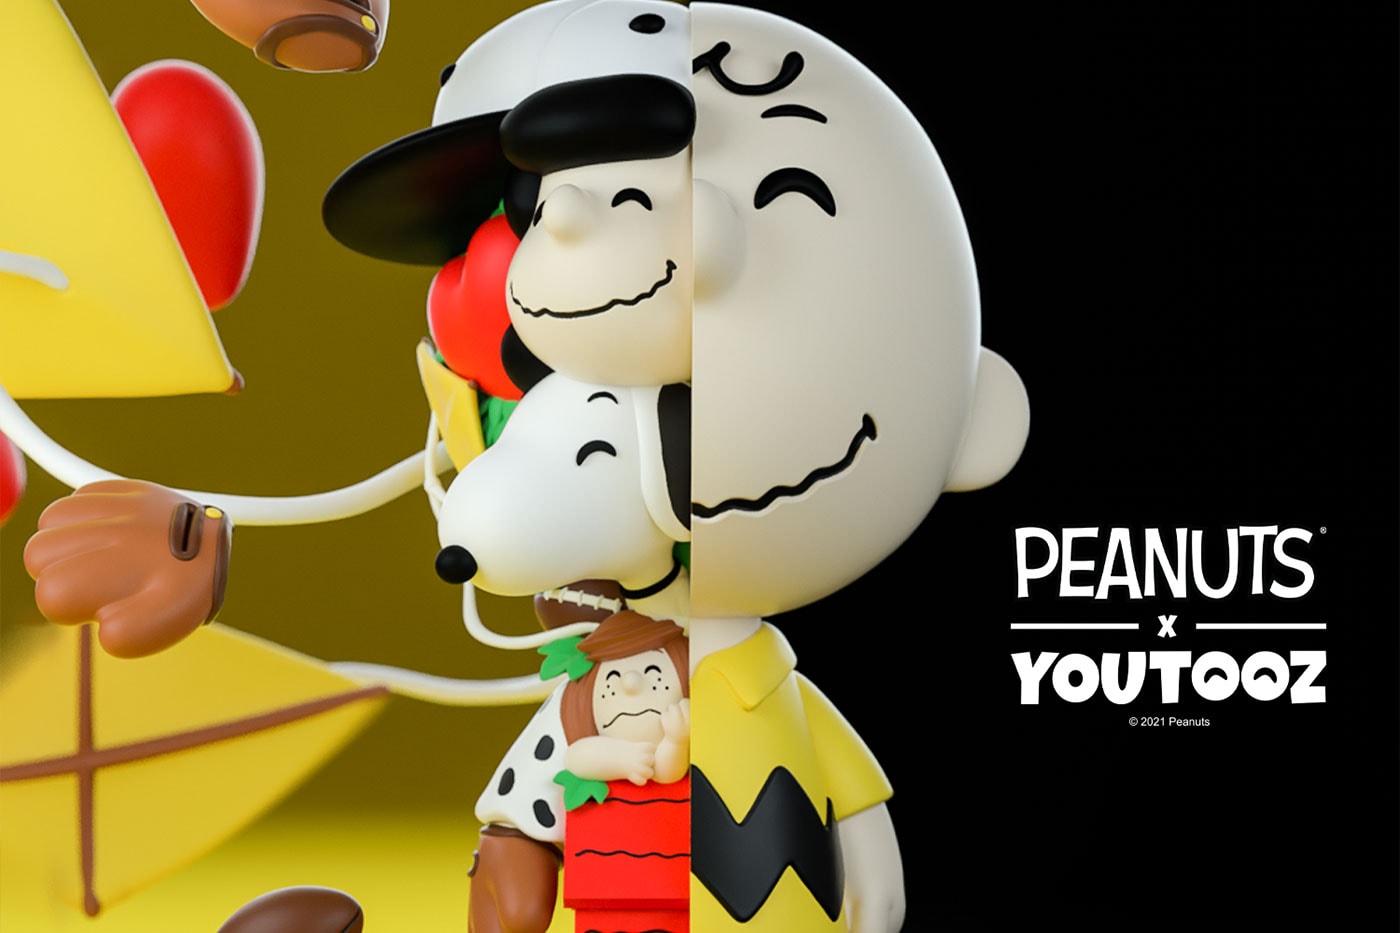 Youtooz Charlie Brown Dissected Figure Buy Price Release Info Peanuts Revealed Snoopy Lucy van Pelt Peppermint Patty Woodstock